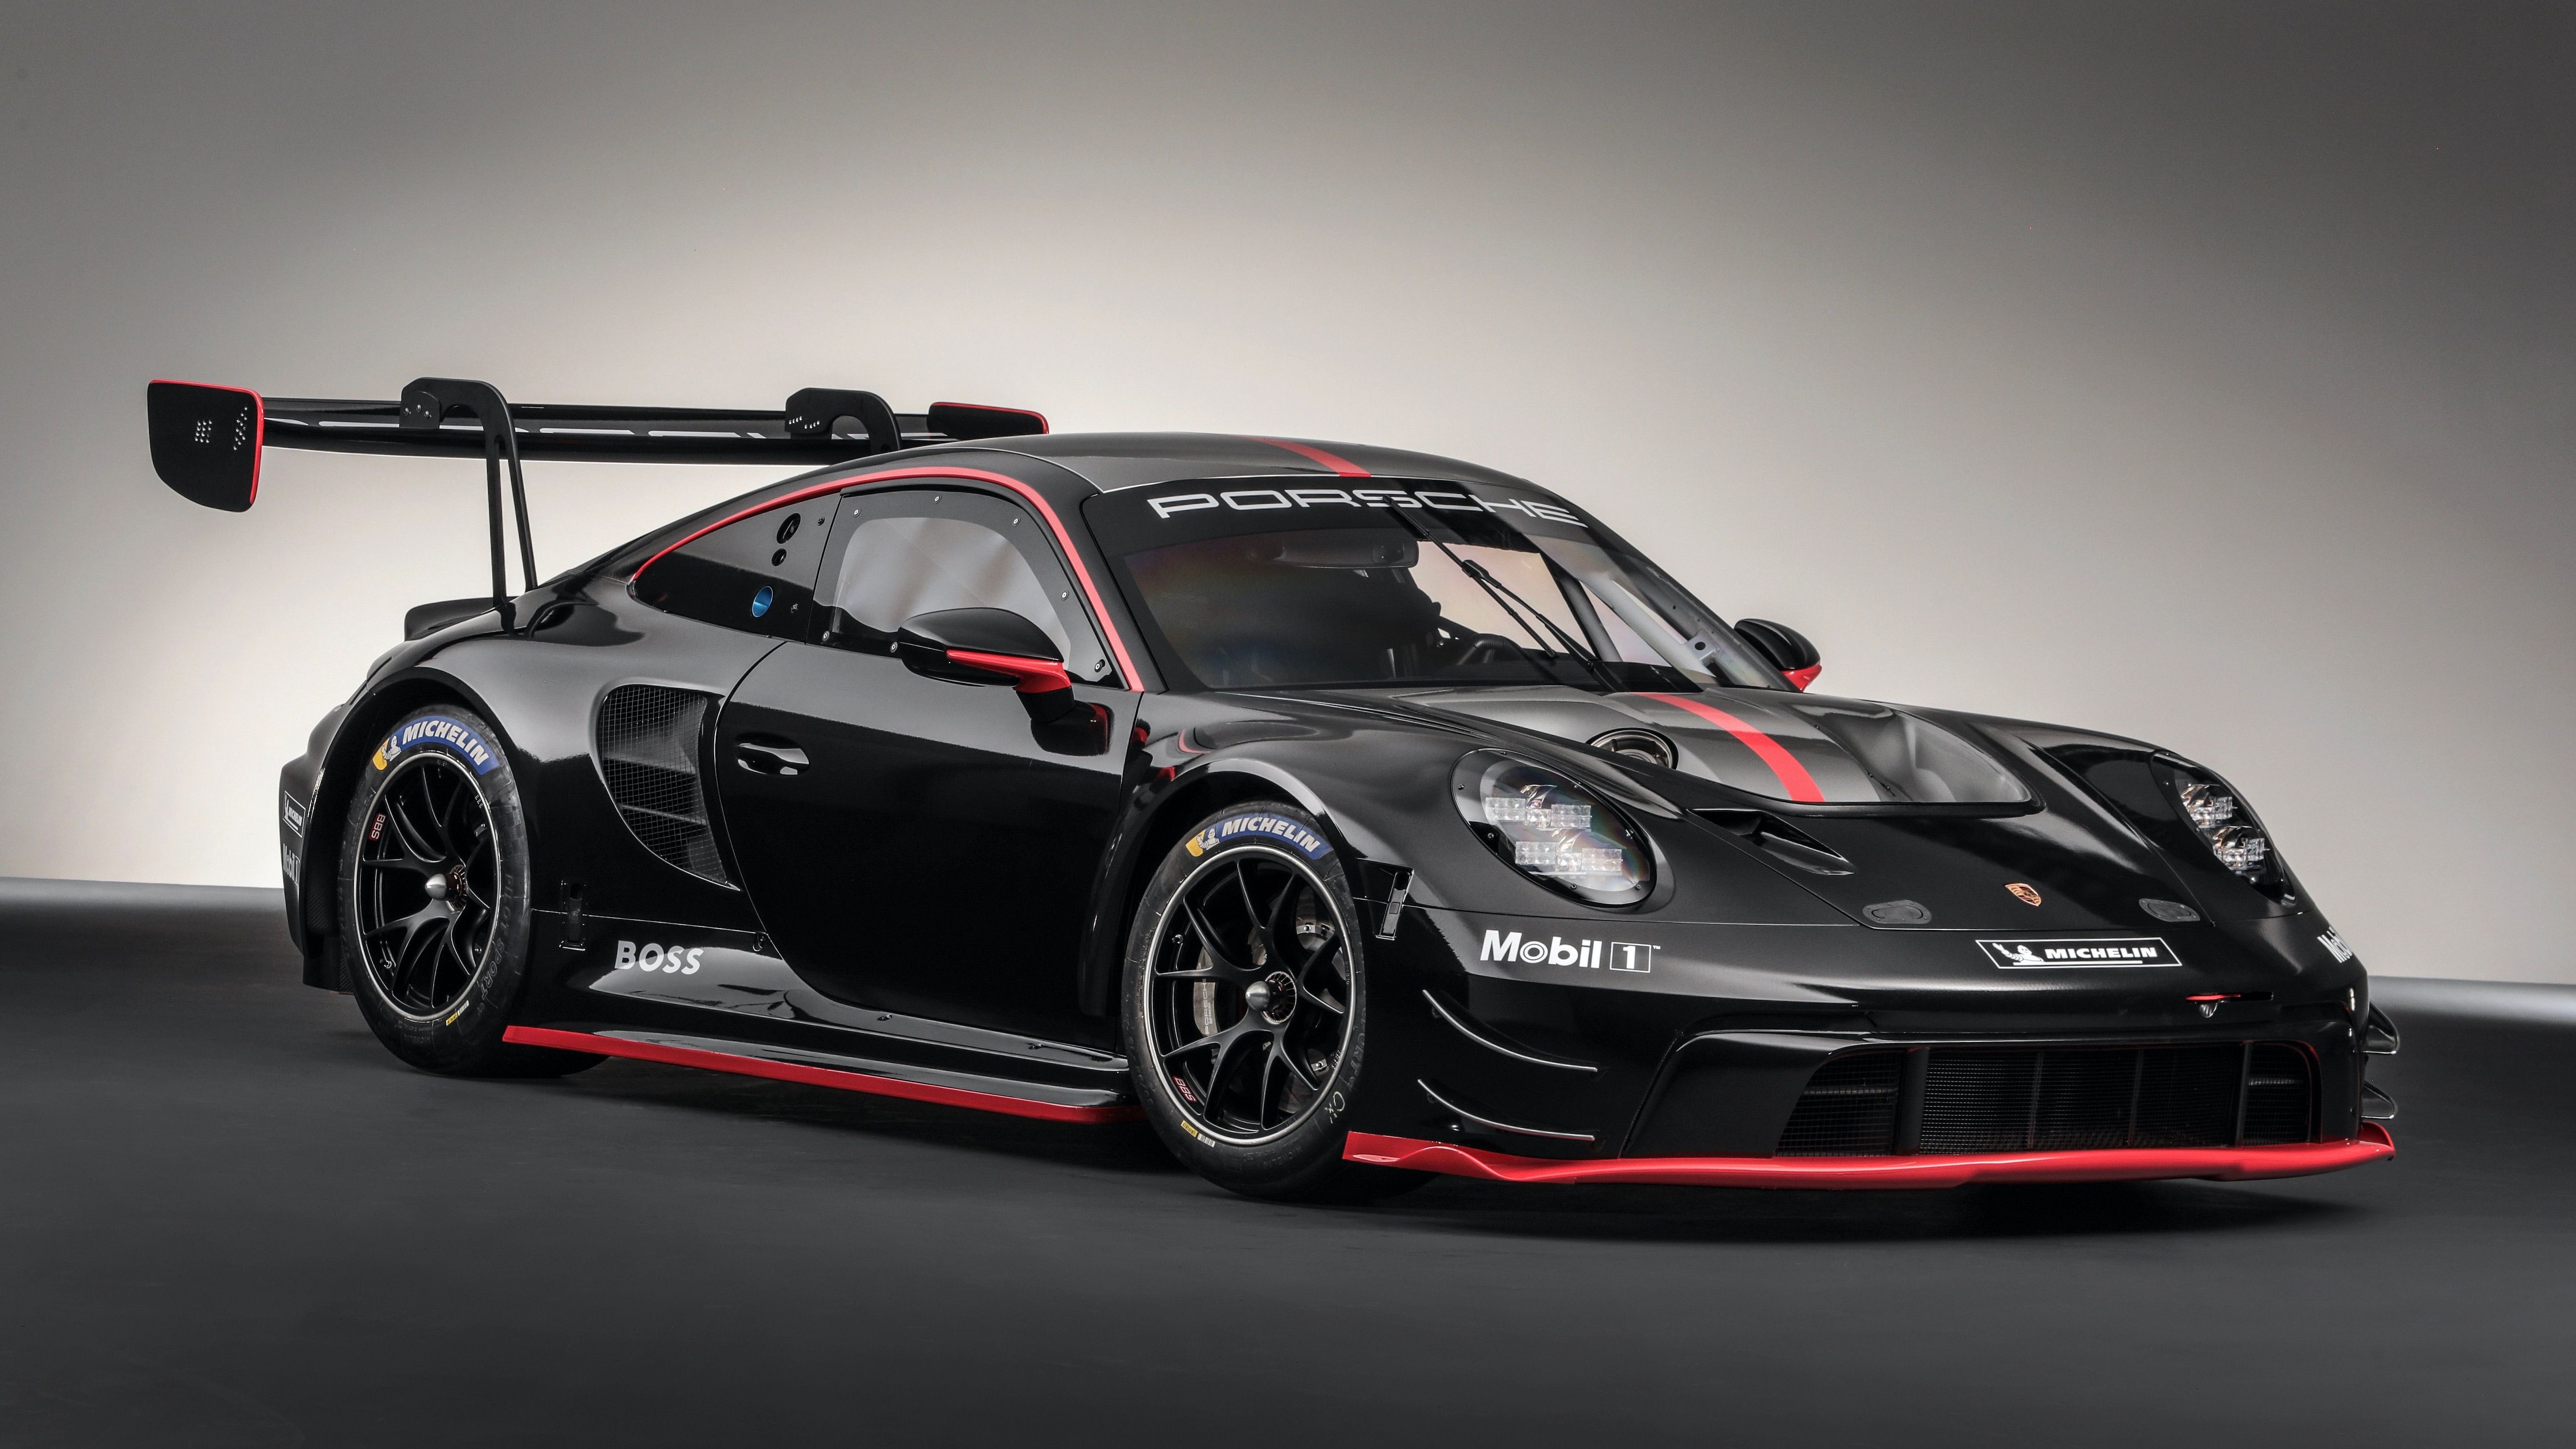 The New 911 GT3 R Takes Porsche Racing to the Next Level